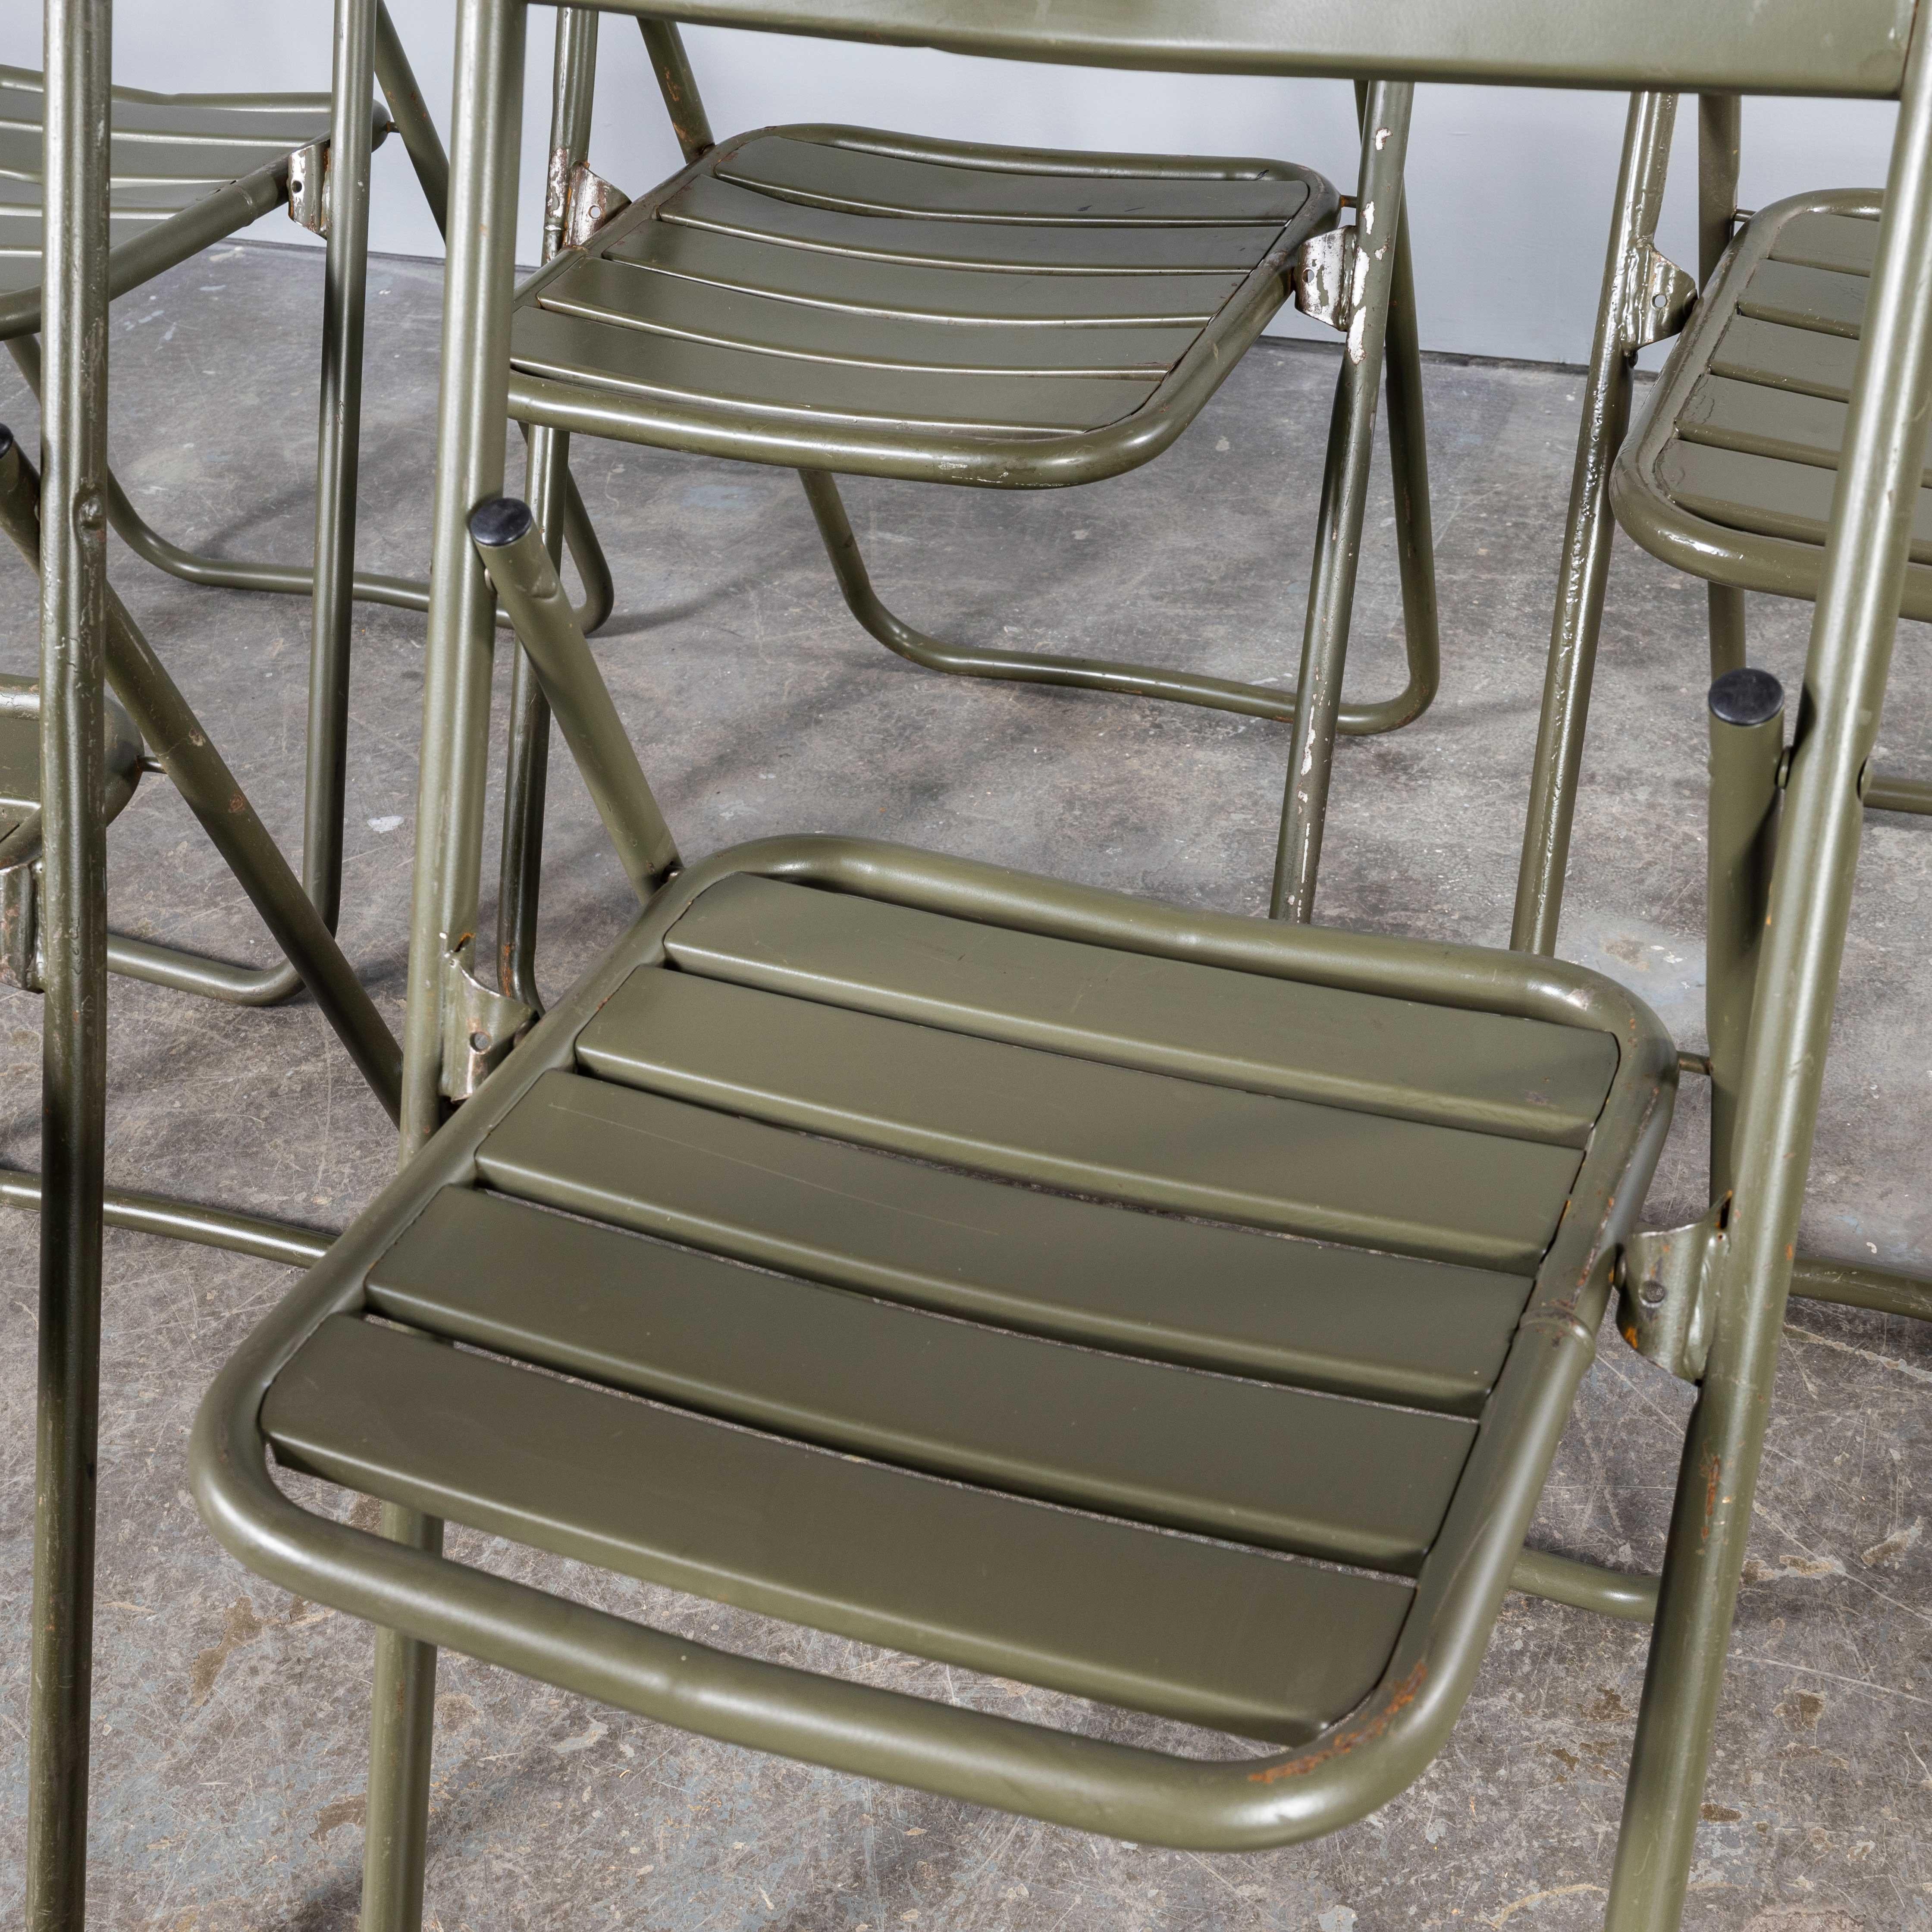 1970's New Old Stock Original French Army Surplus Folding Chairs - Very Large Qu For Sale 2